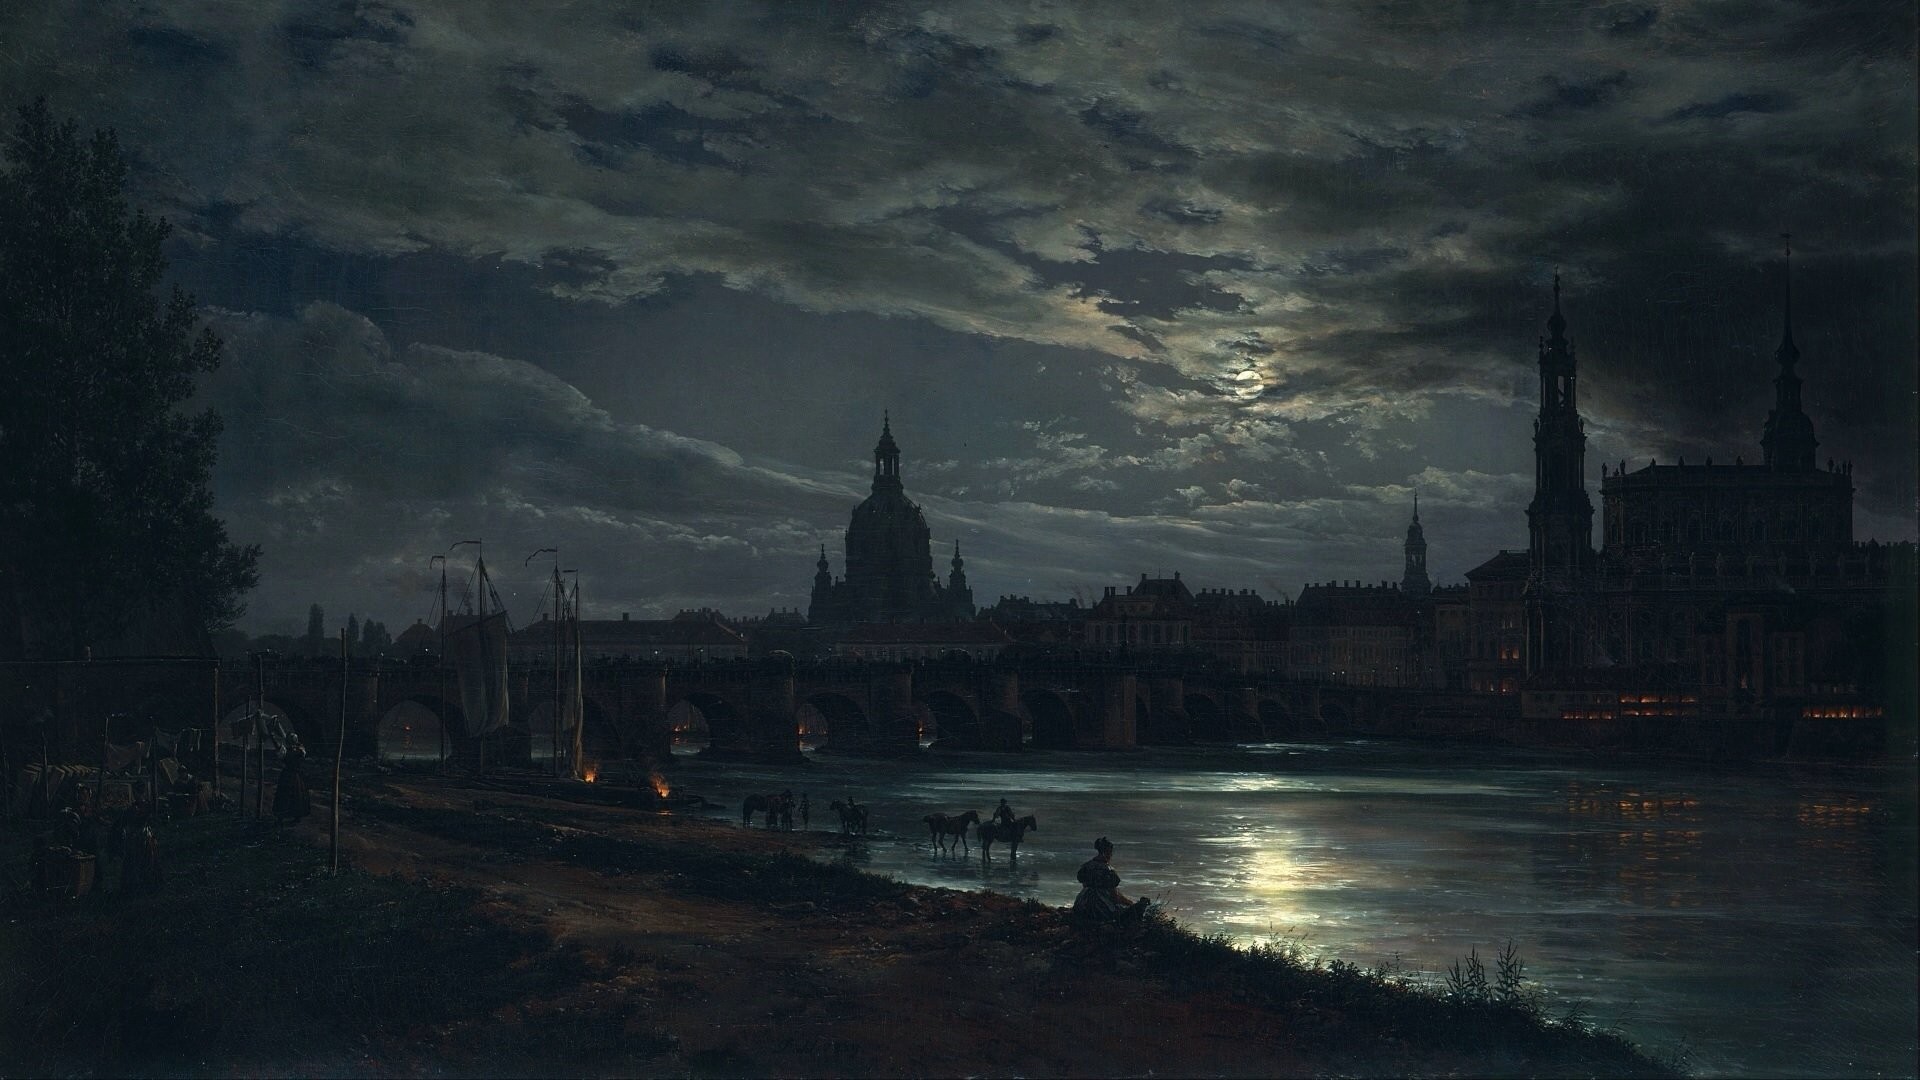 J. C. Dahl, Women, Artwork, Classic art, Painting, Dresden, Germany, Cityscape, City, Night, River, Bridge, Moon, Cathedral, Reflection, Moonlight, Lights, Clouds, Trees, Horse, Ship Wallpaper